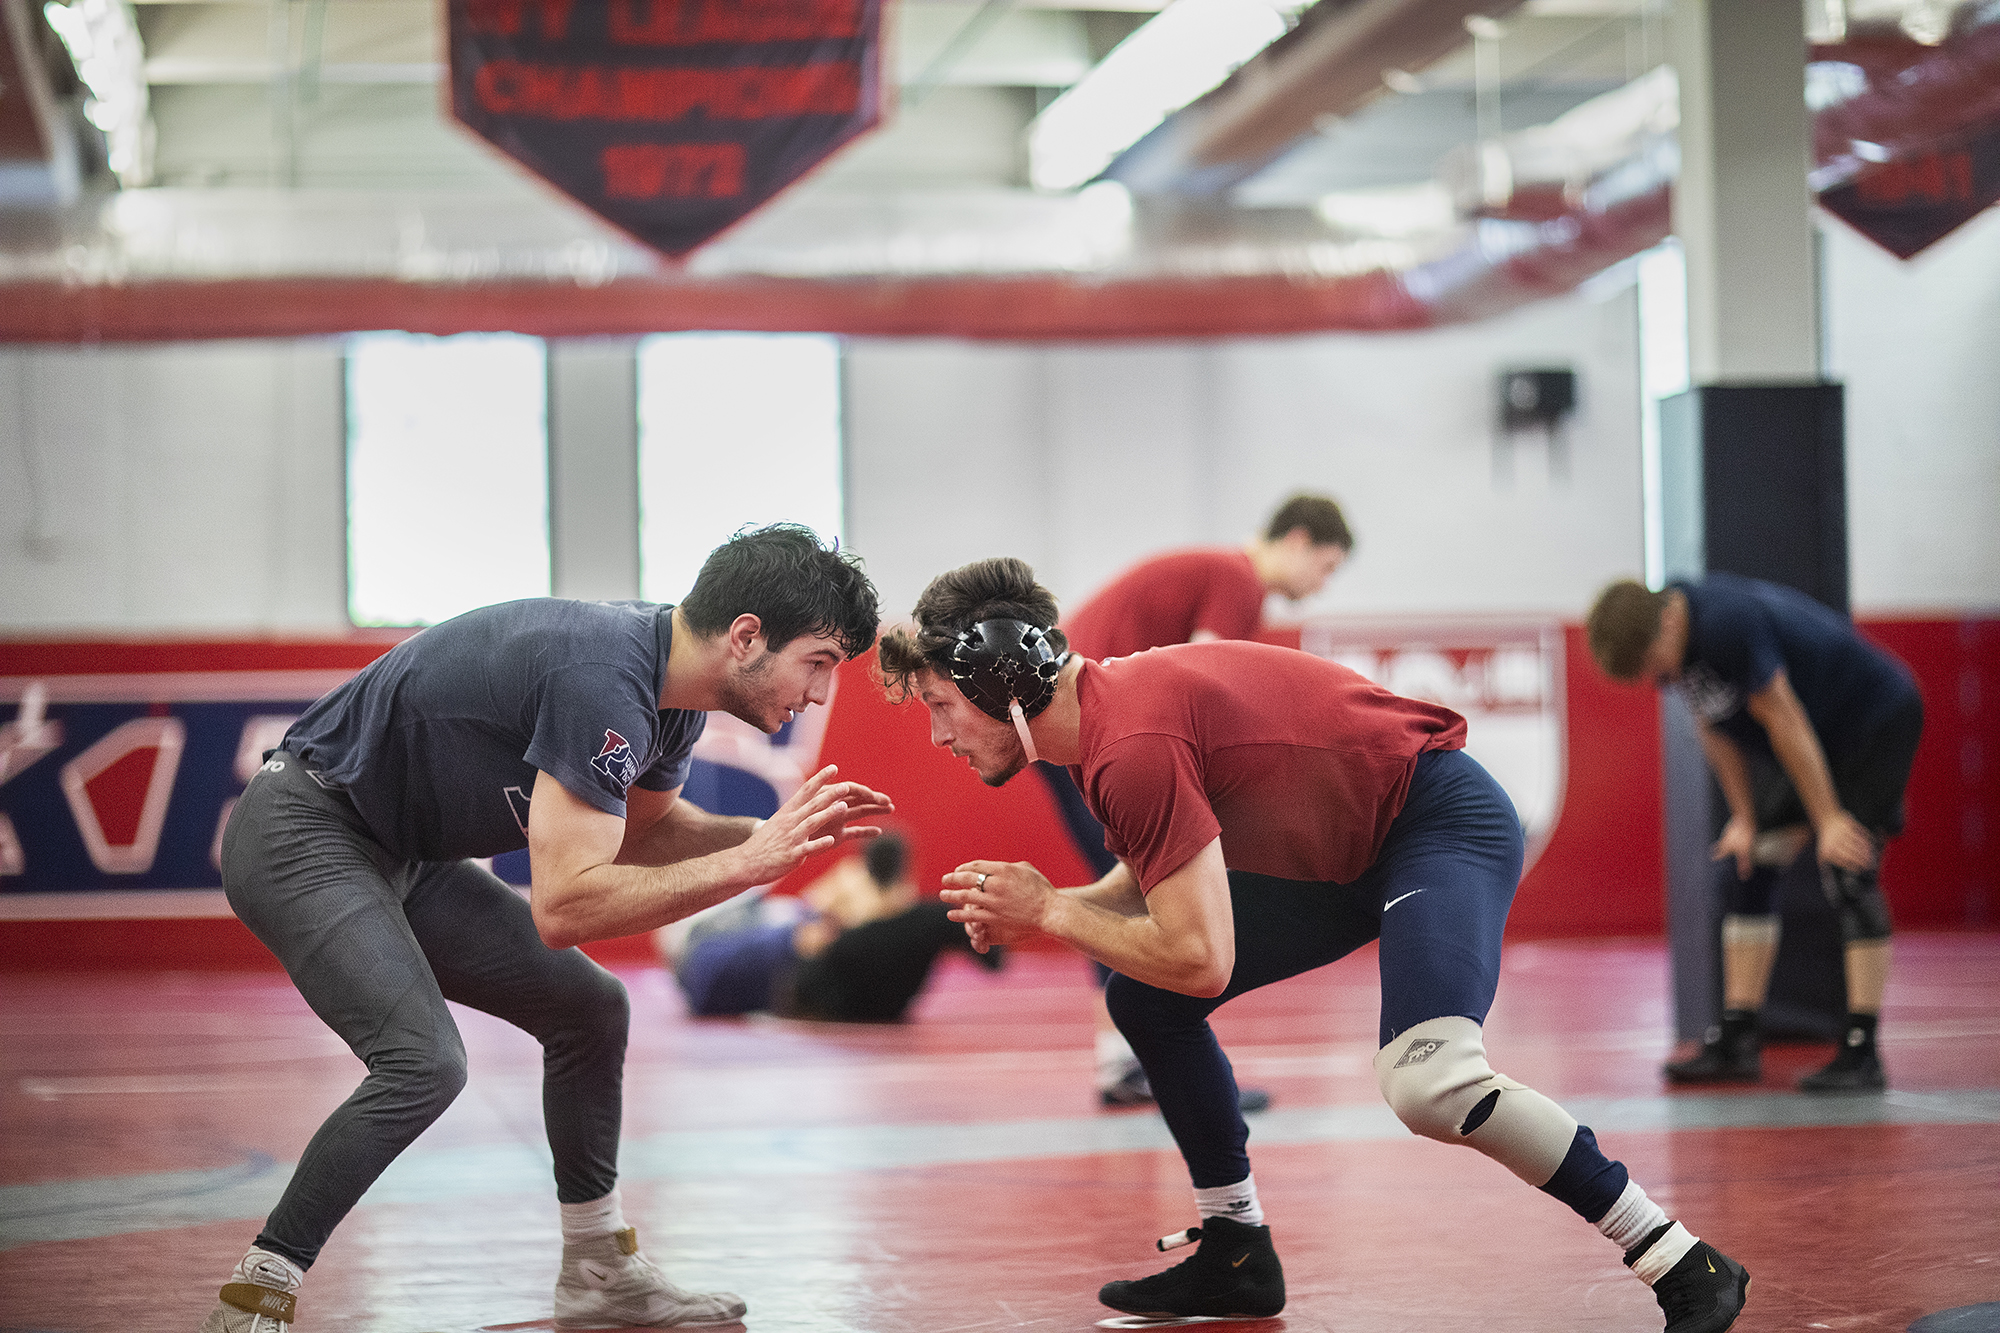 wrestling athletes on the mat in the training center